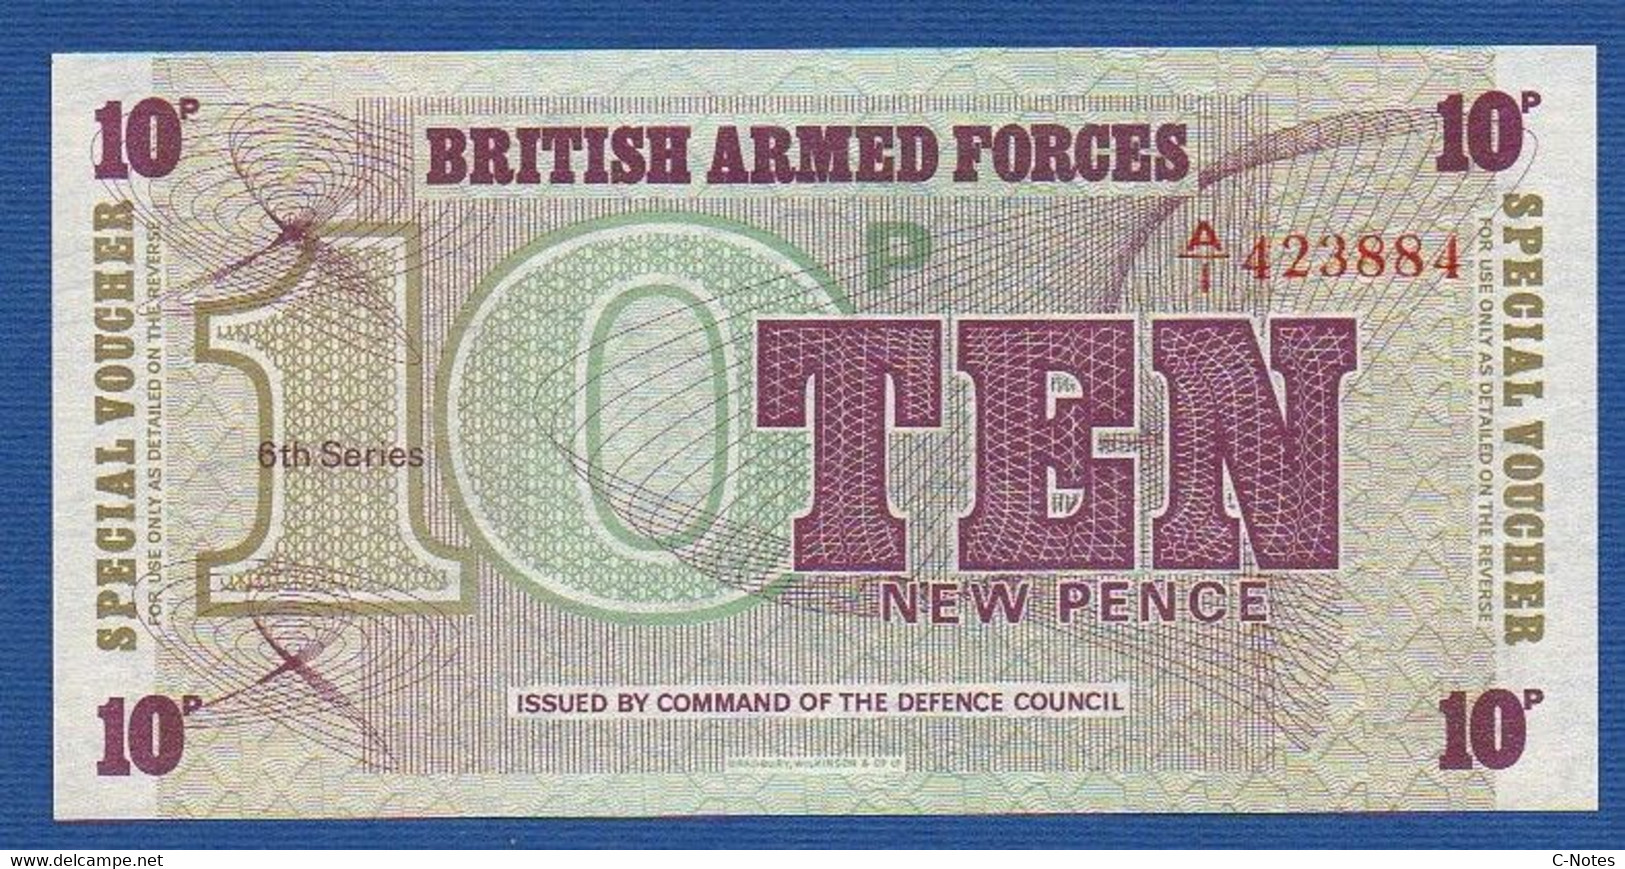 GREAT BRITAIN - P.M48 – 10 New Pence ND (1972) UNC, Serie A/1 423884, Printer Bradbury Wilkinson, New Malden - British Armed Forces & Special Vouchers